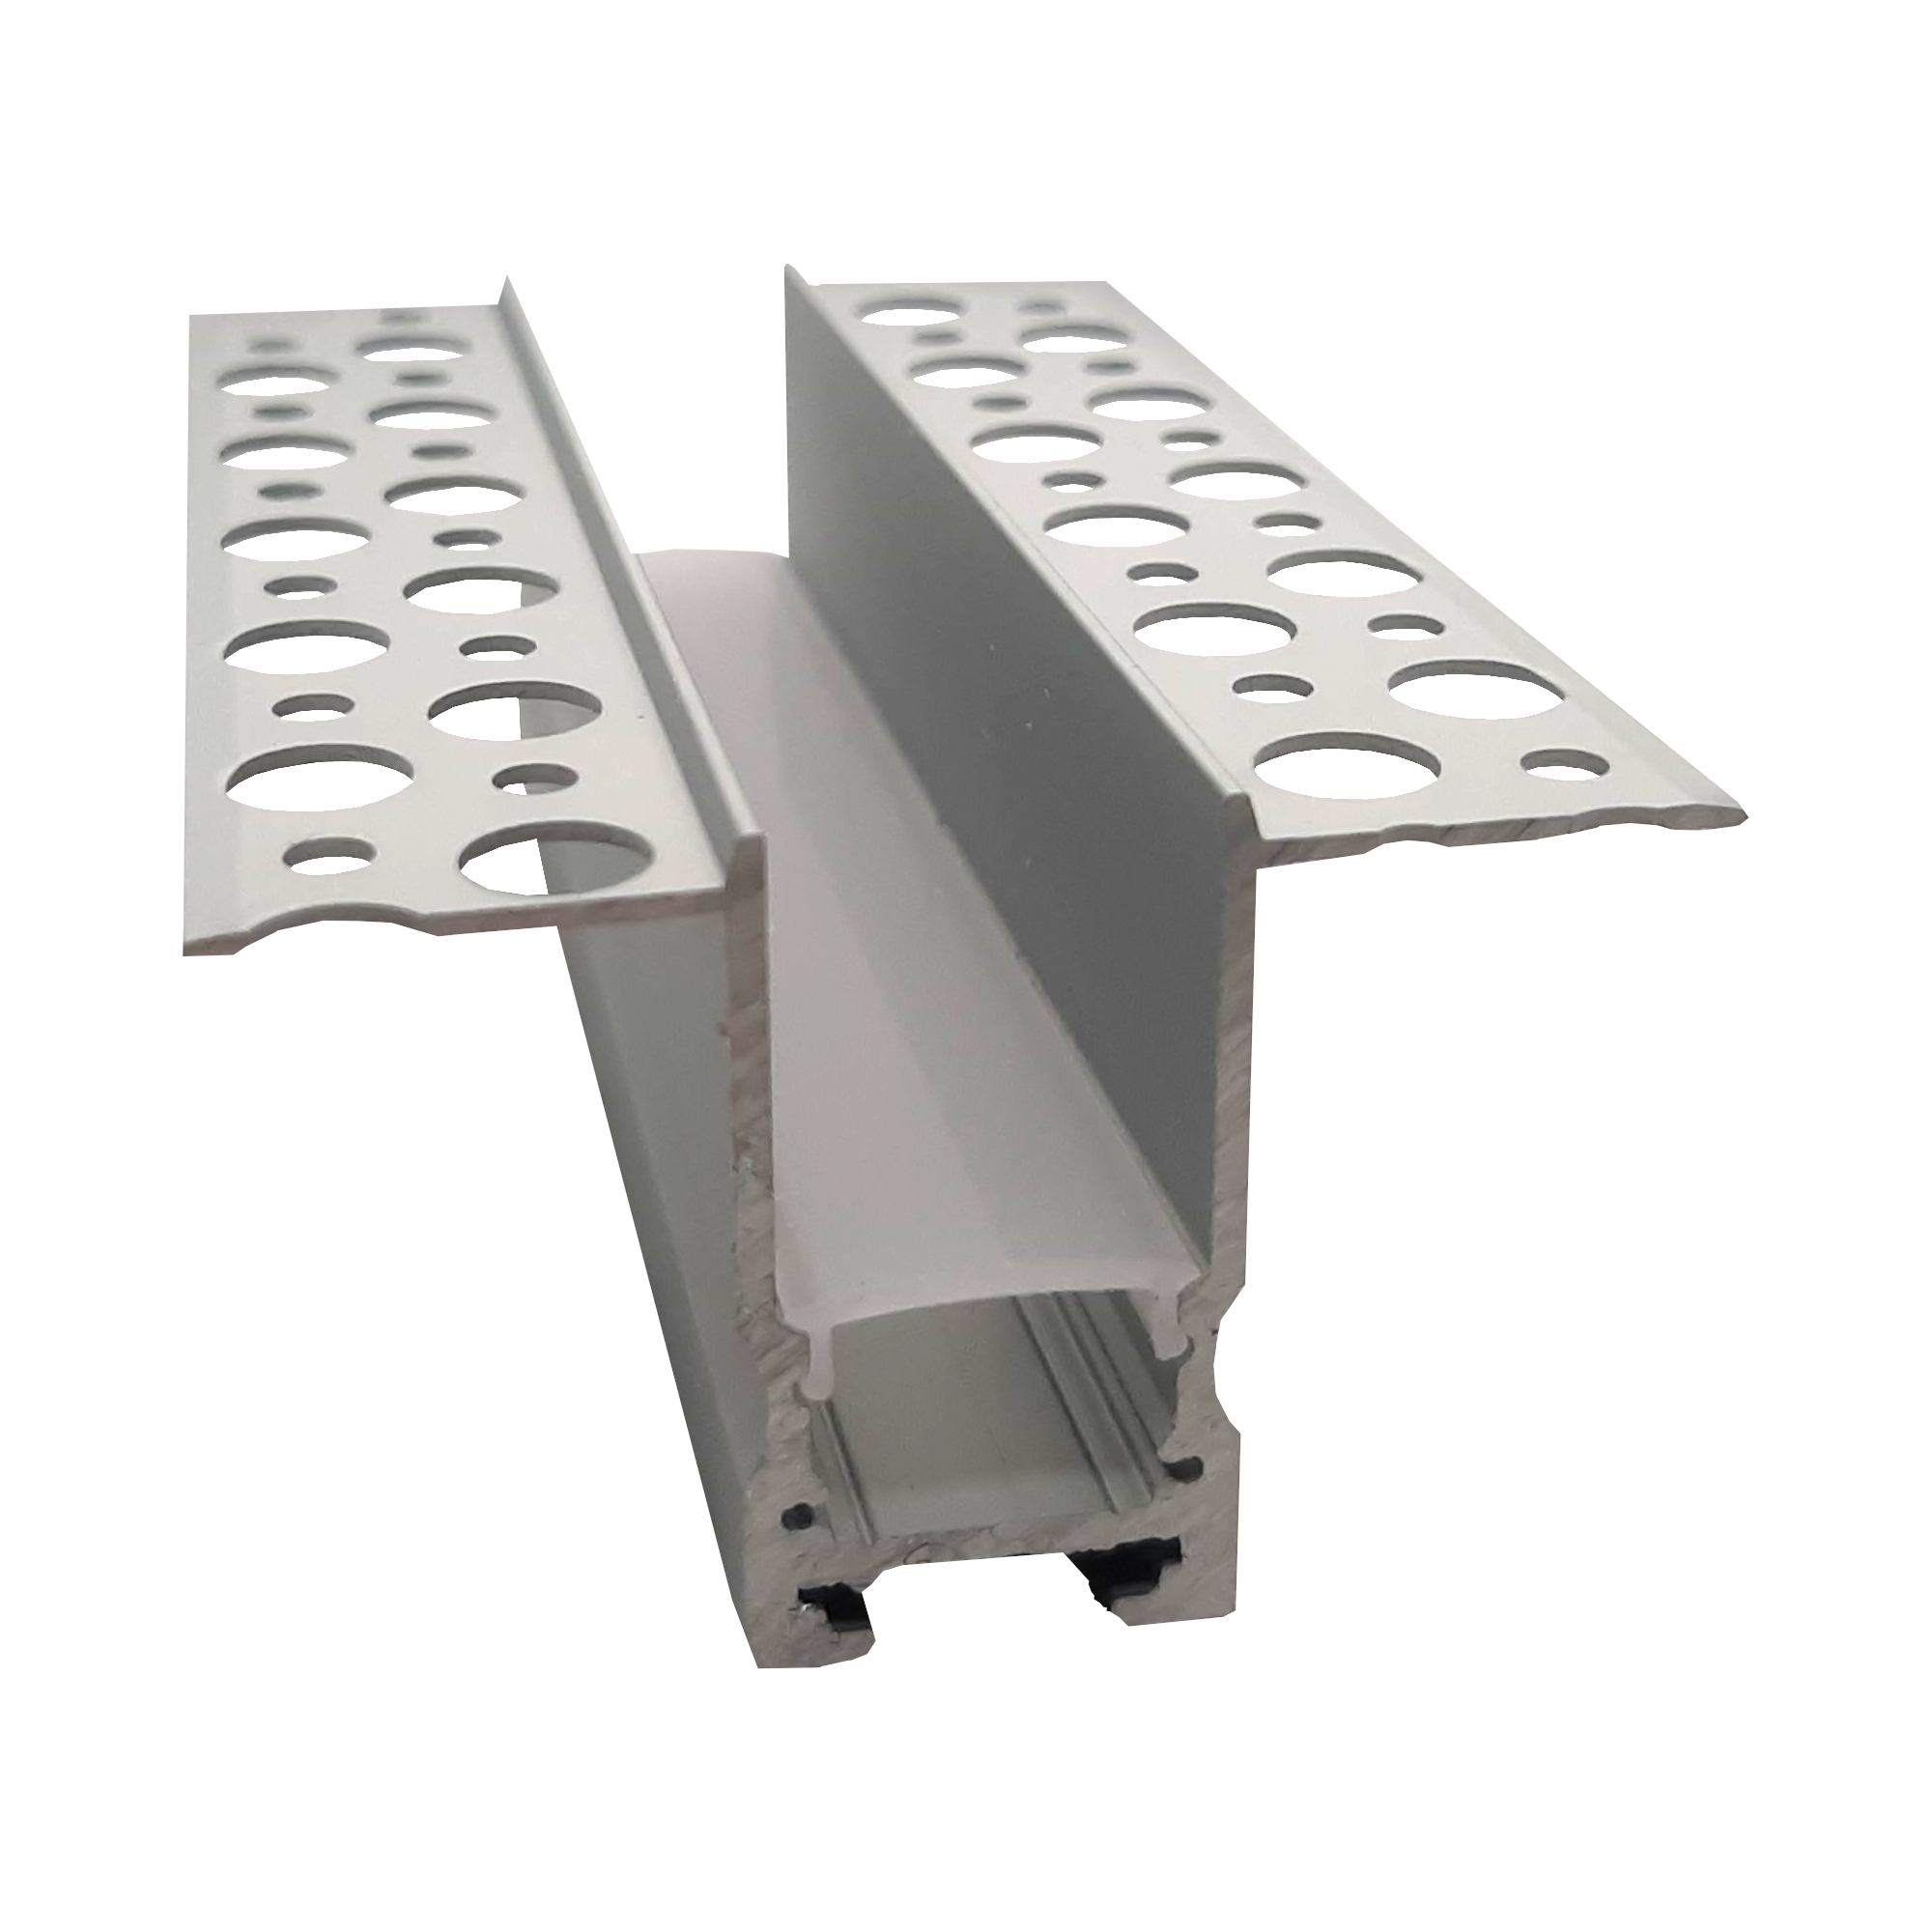 RSA-50 Recessed Plaster Extrusion 2 Wing